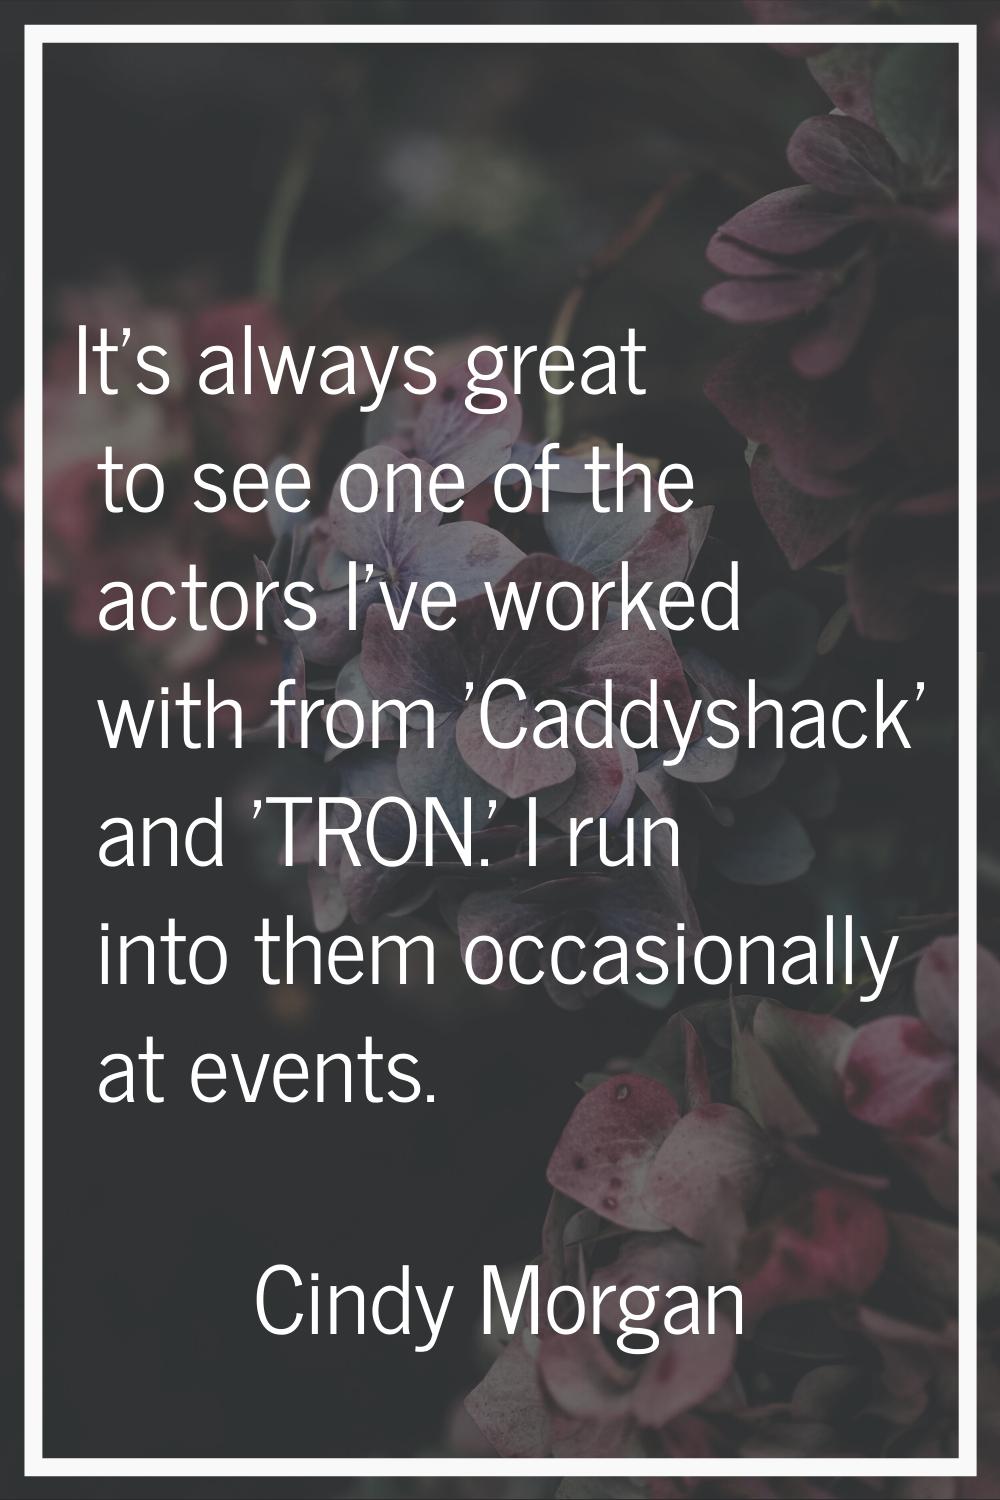 It's always great to see one of the actors I've worked with from 'Caddyshack' and 'TRON.' I run int